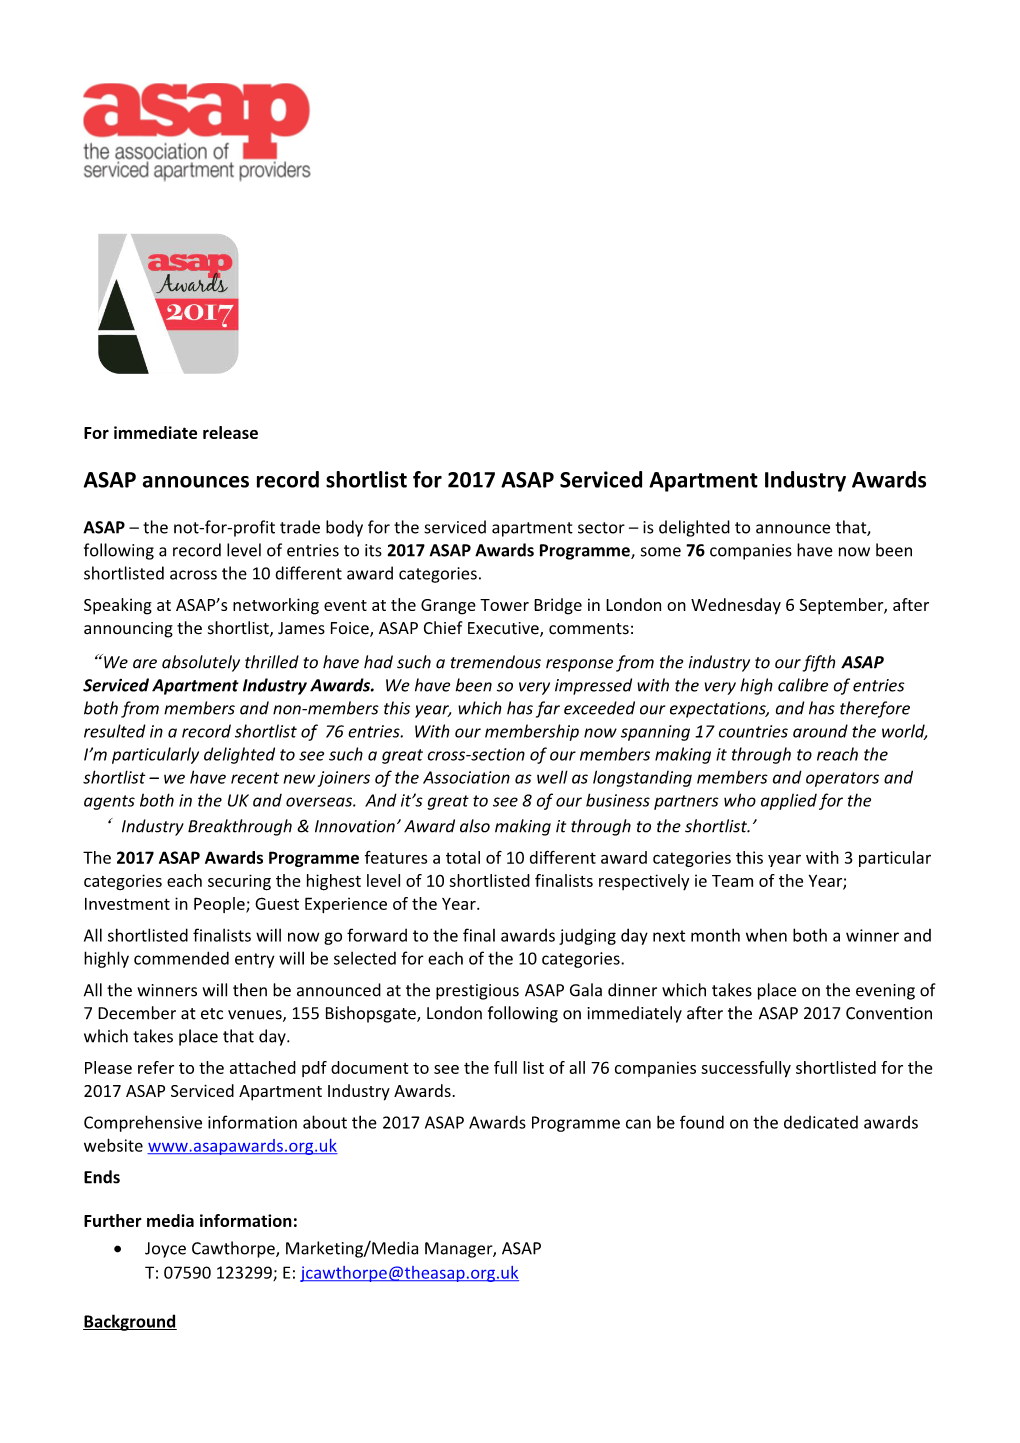 ASAP Announces Record Shortlist for 2017 ASAP Serviced Apartment Industry Awards